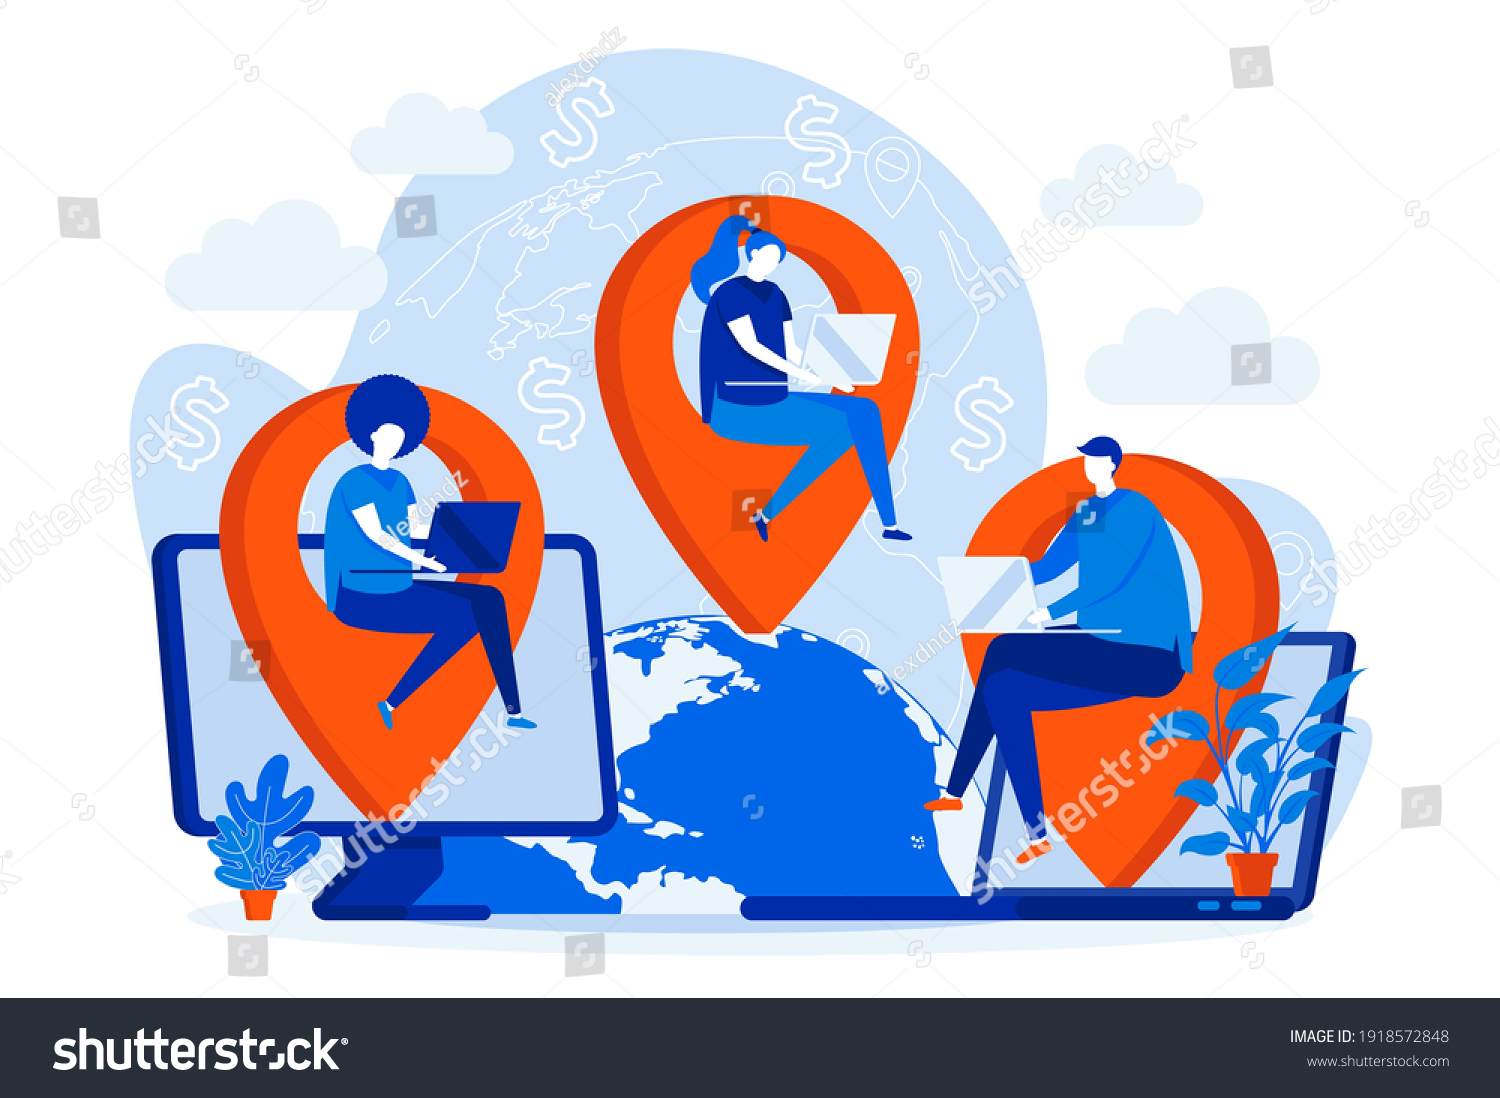 Outsourcing company web design concept with people characters. Developers team working scene. Software outsourcing composition in flat style. Vector illustration for social media promotional materials #1918572848